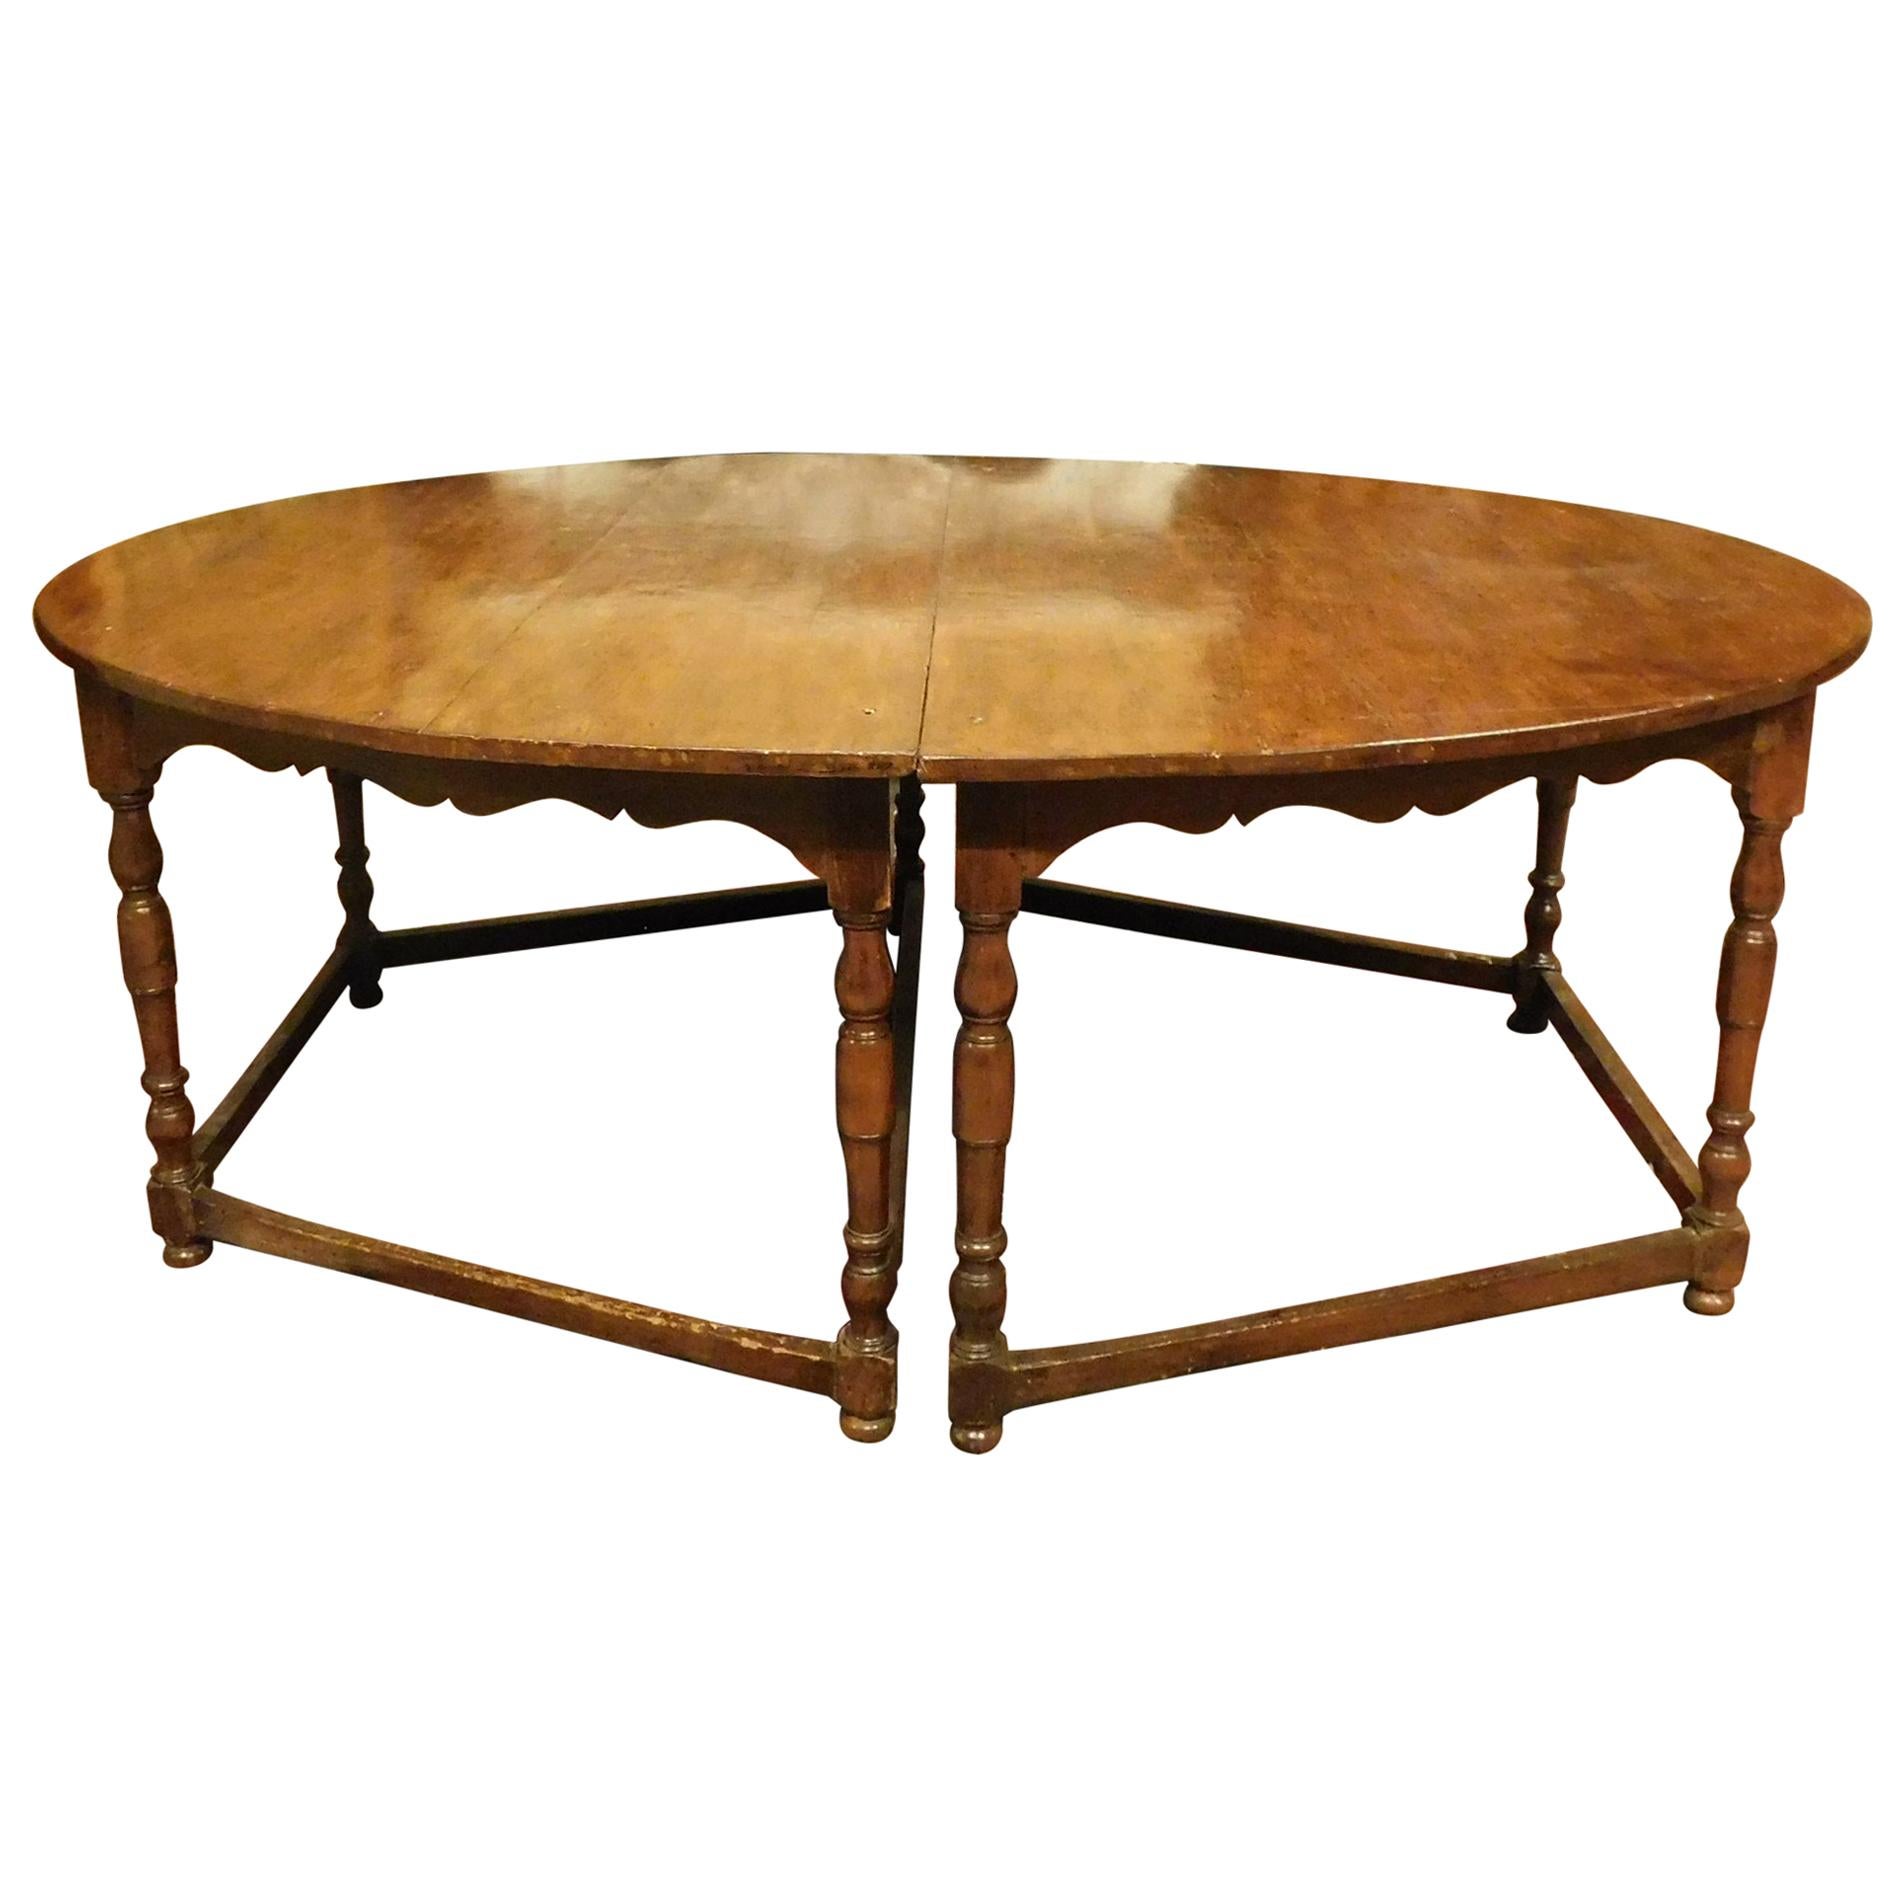 Antique Oval Table in Beechwood, Divisible 2 Half-Moons with 8 Legs, 1600, Italy